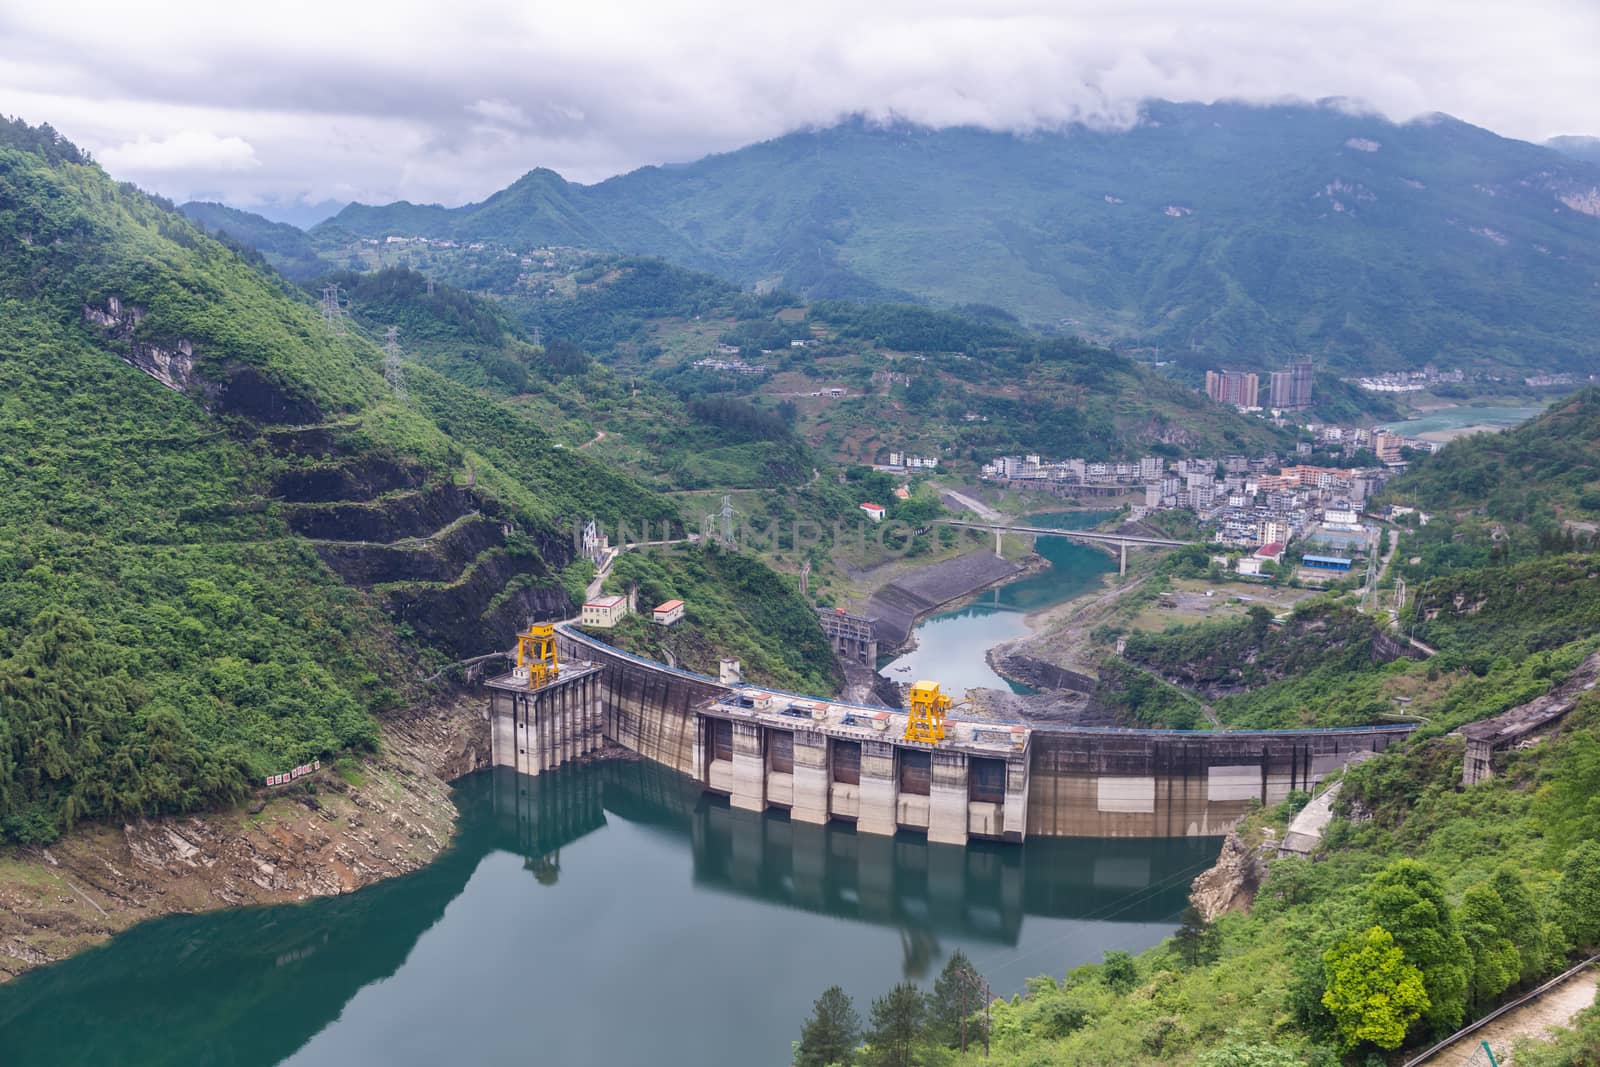 Dam wall and surrounding landscape at Wulong Dam in Chongqing, China. during summer with a low water level on a clear sunny day.